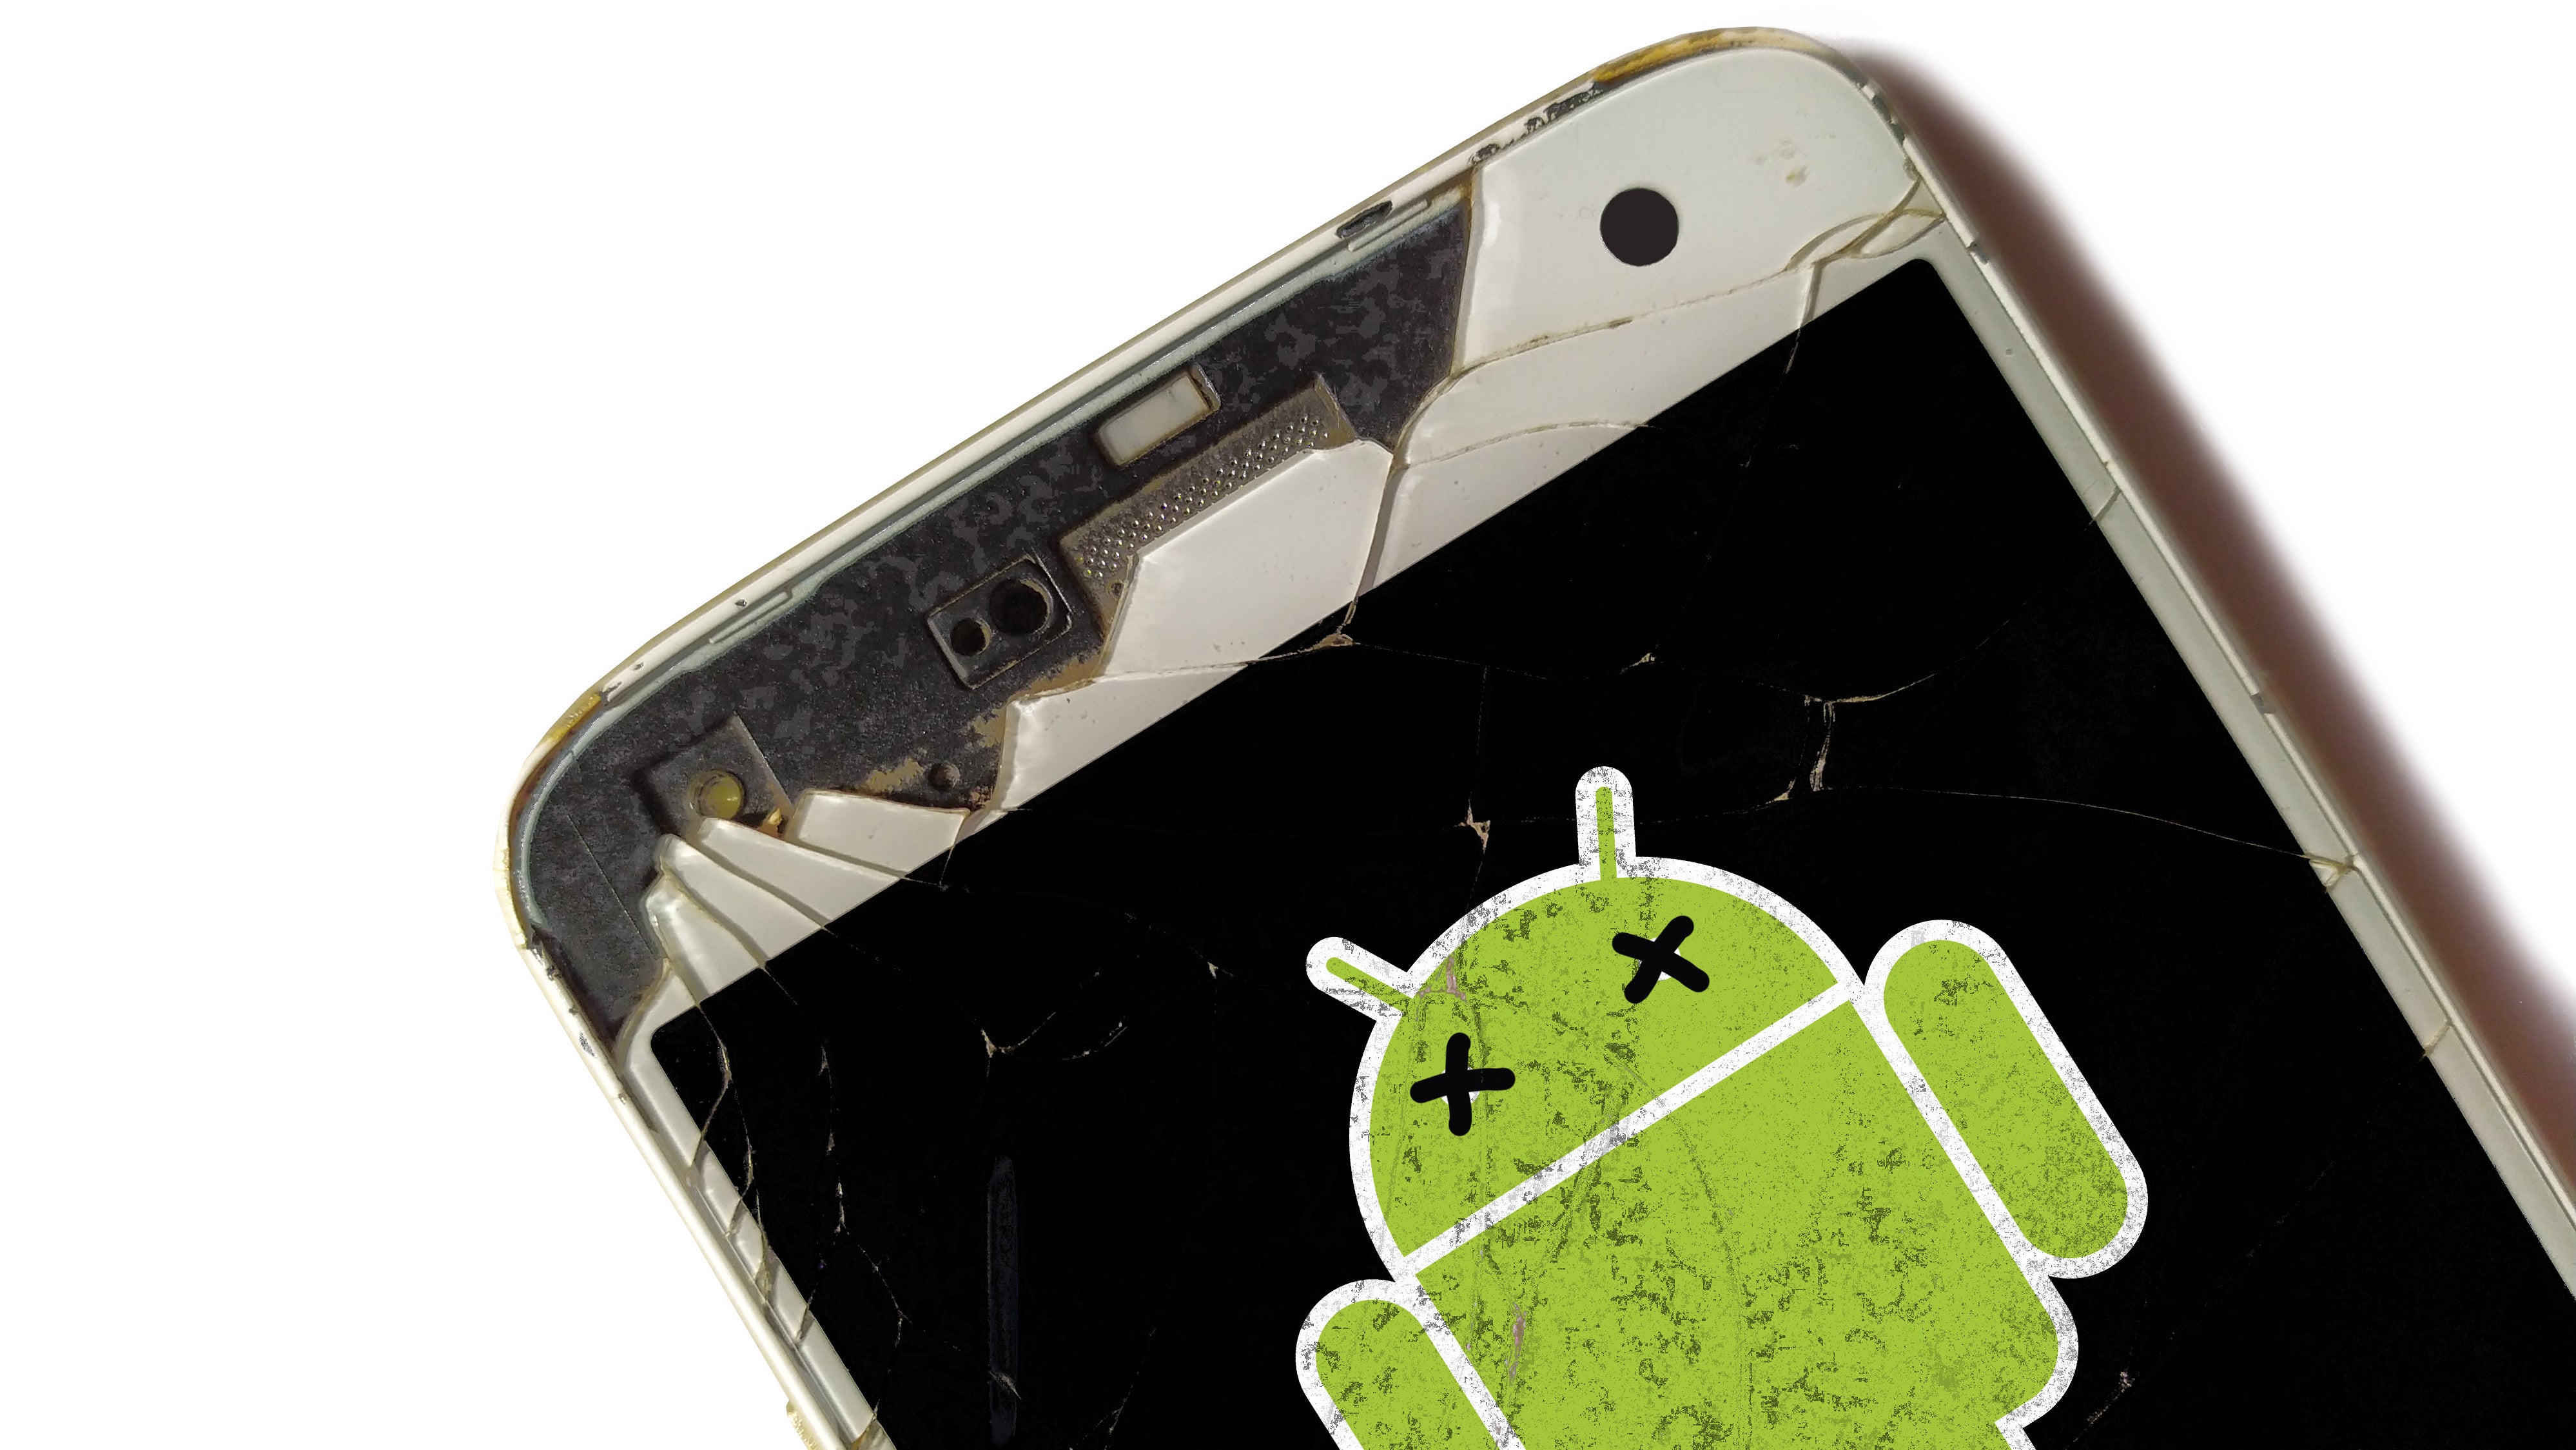 This New Android Malware Can Survive A Factory Reset